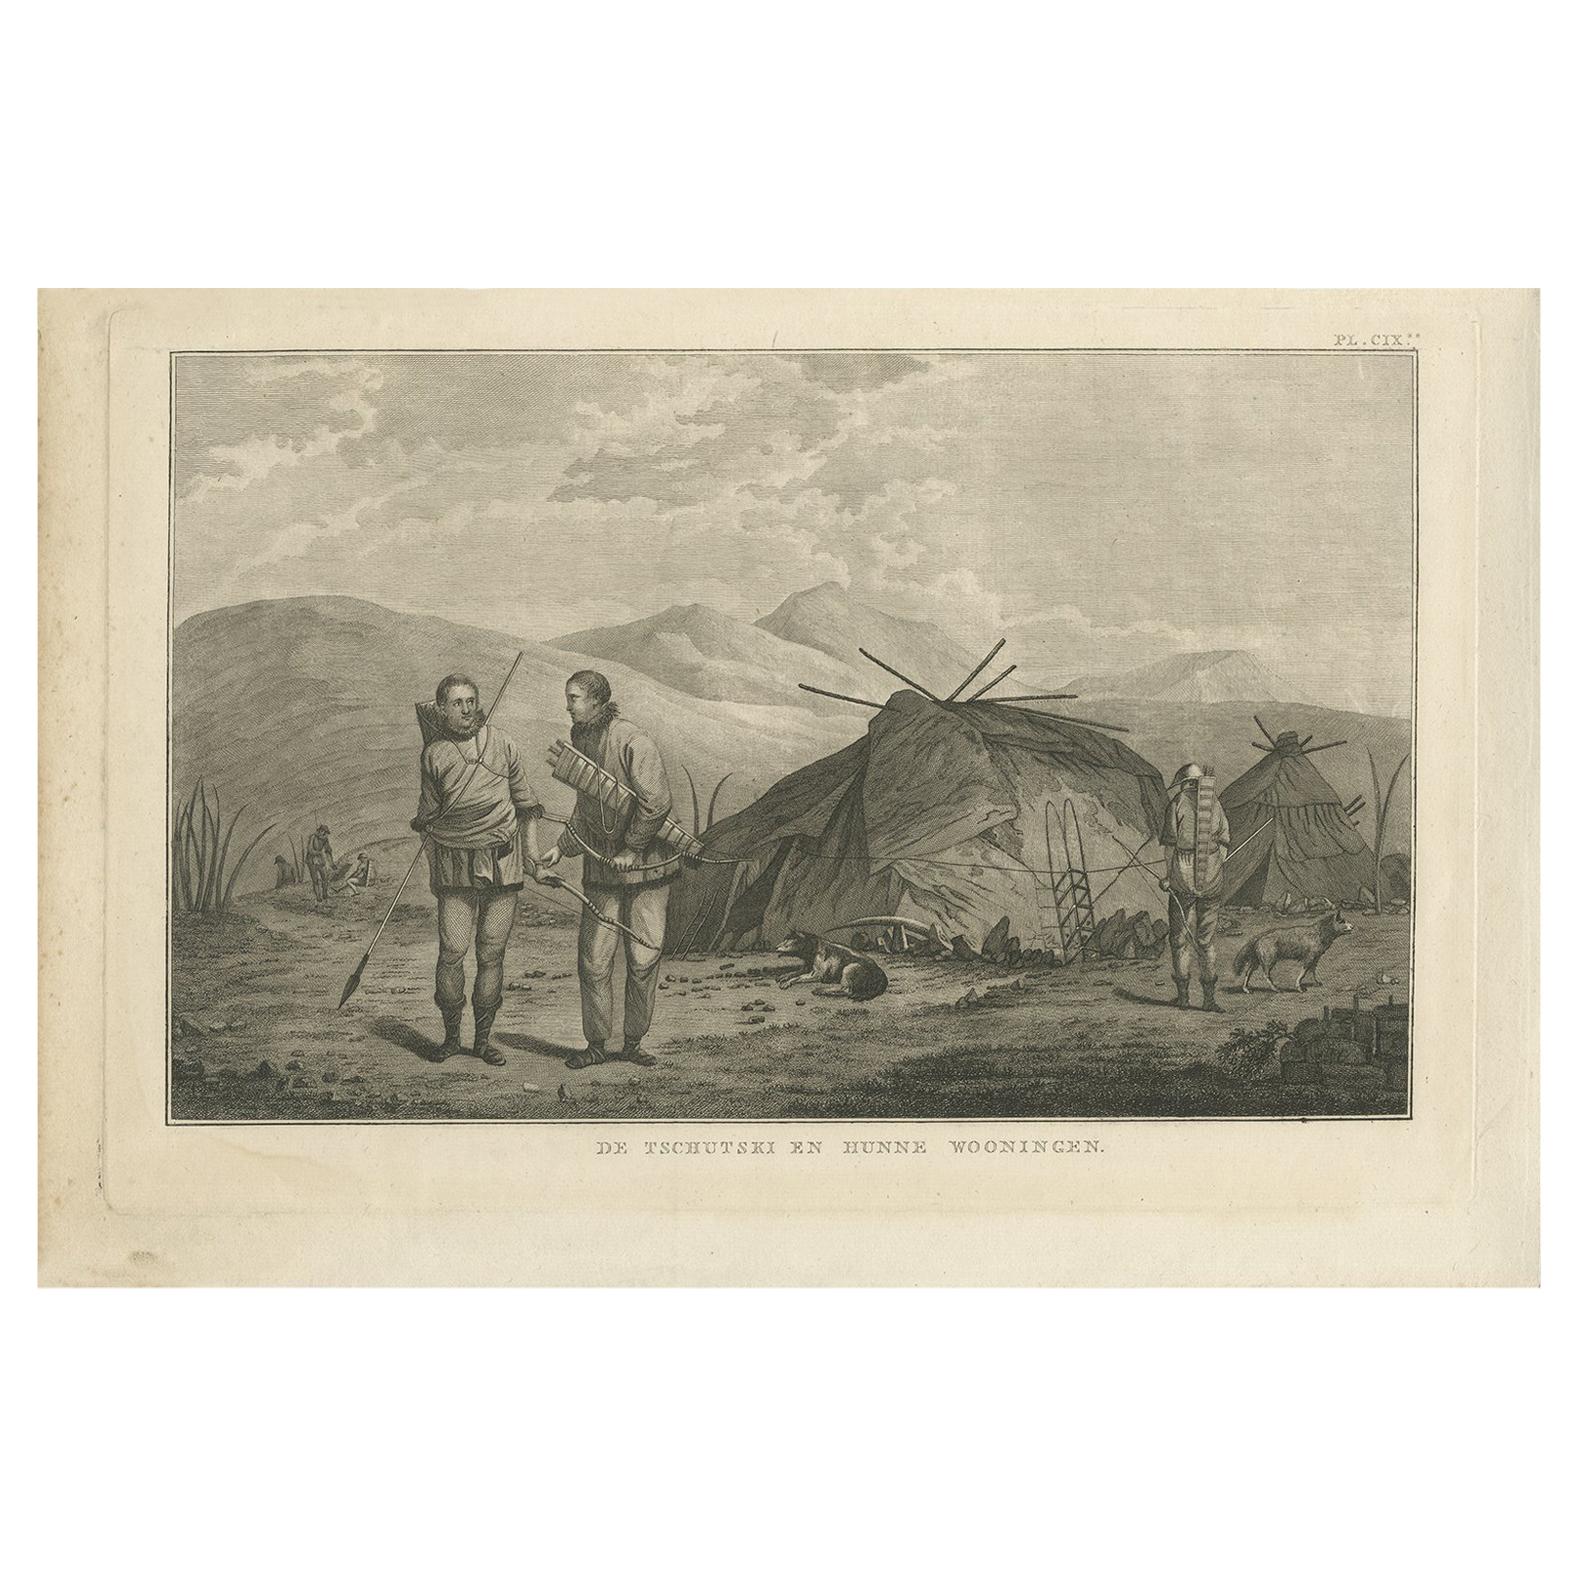 Antique Print of Chukchi People by Cook, 1803